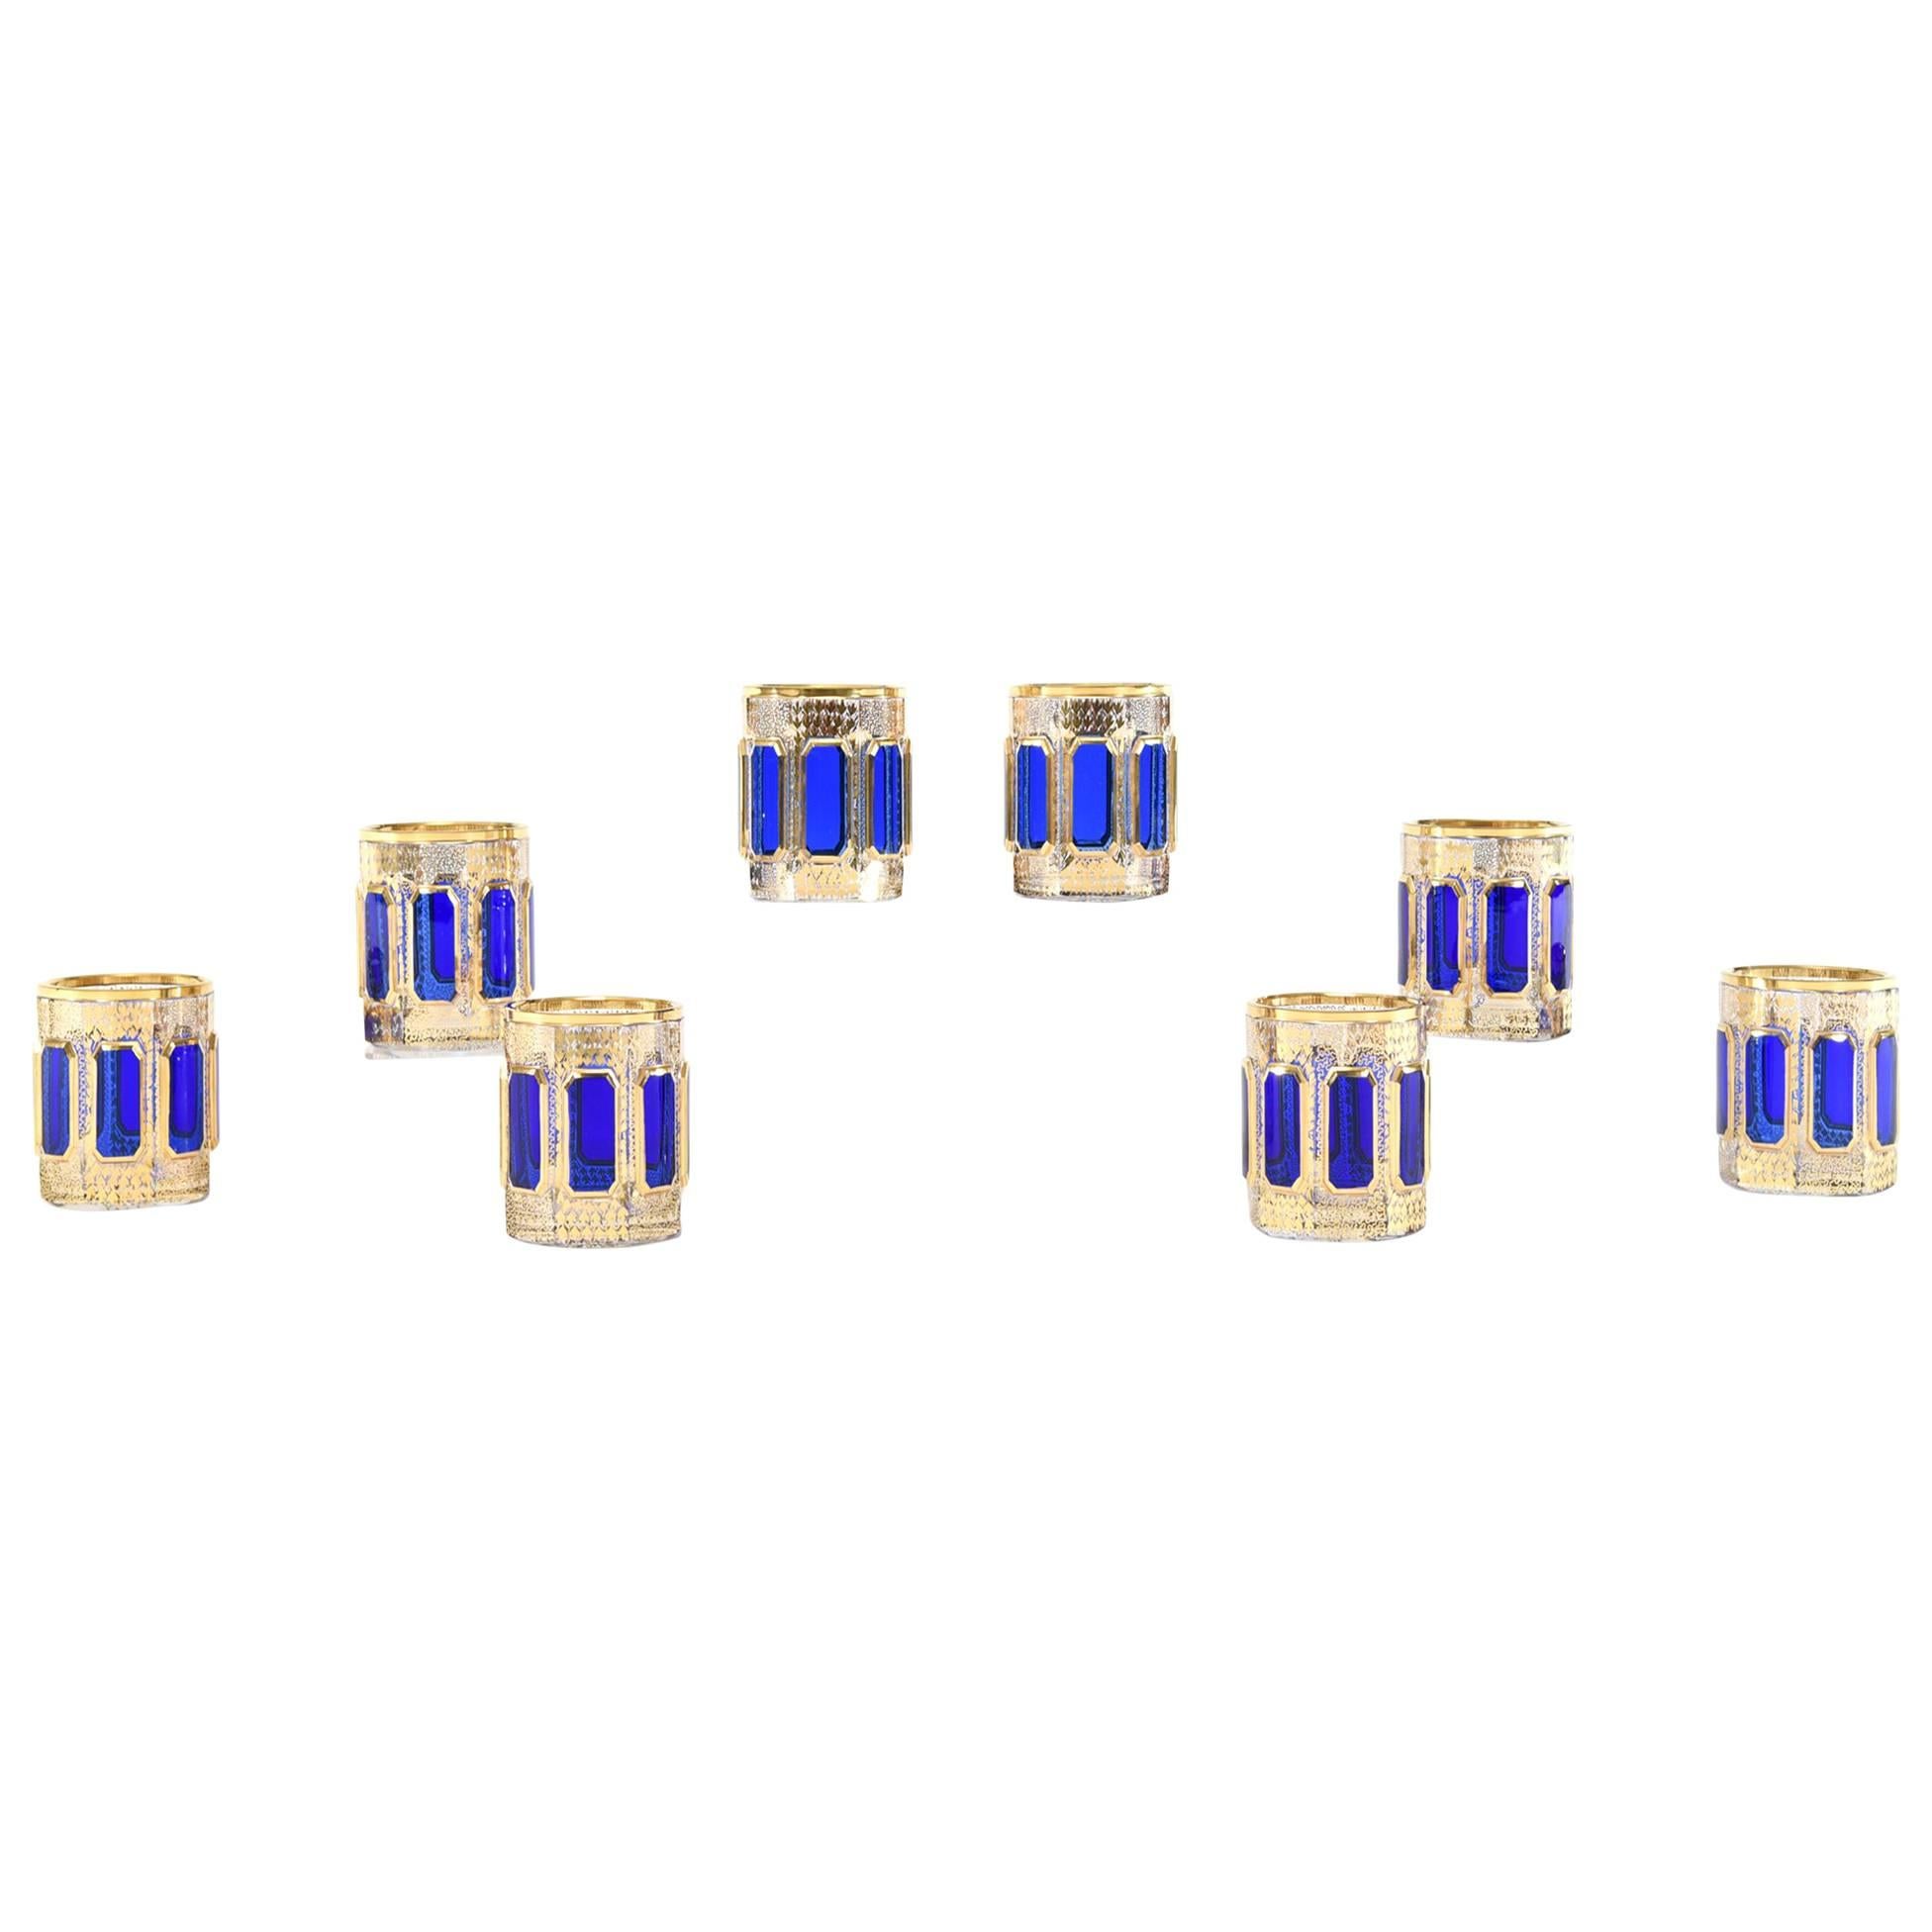 Set of Eight Moser Cobalt Blue and Gold Crystal High Ball Glasses Panel Cut